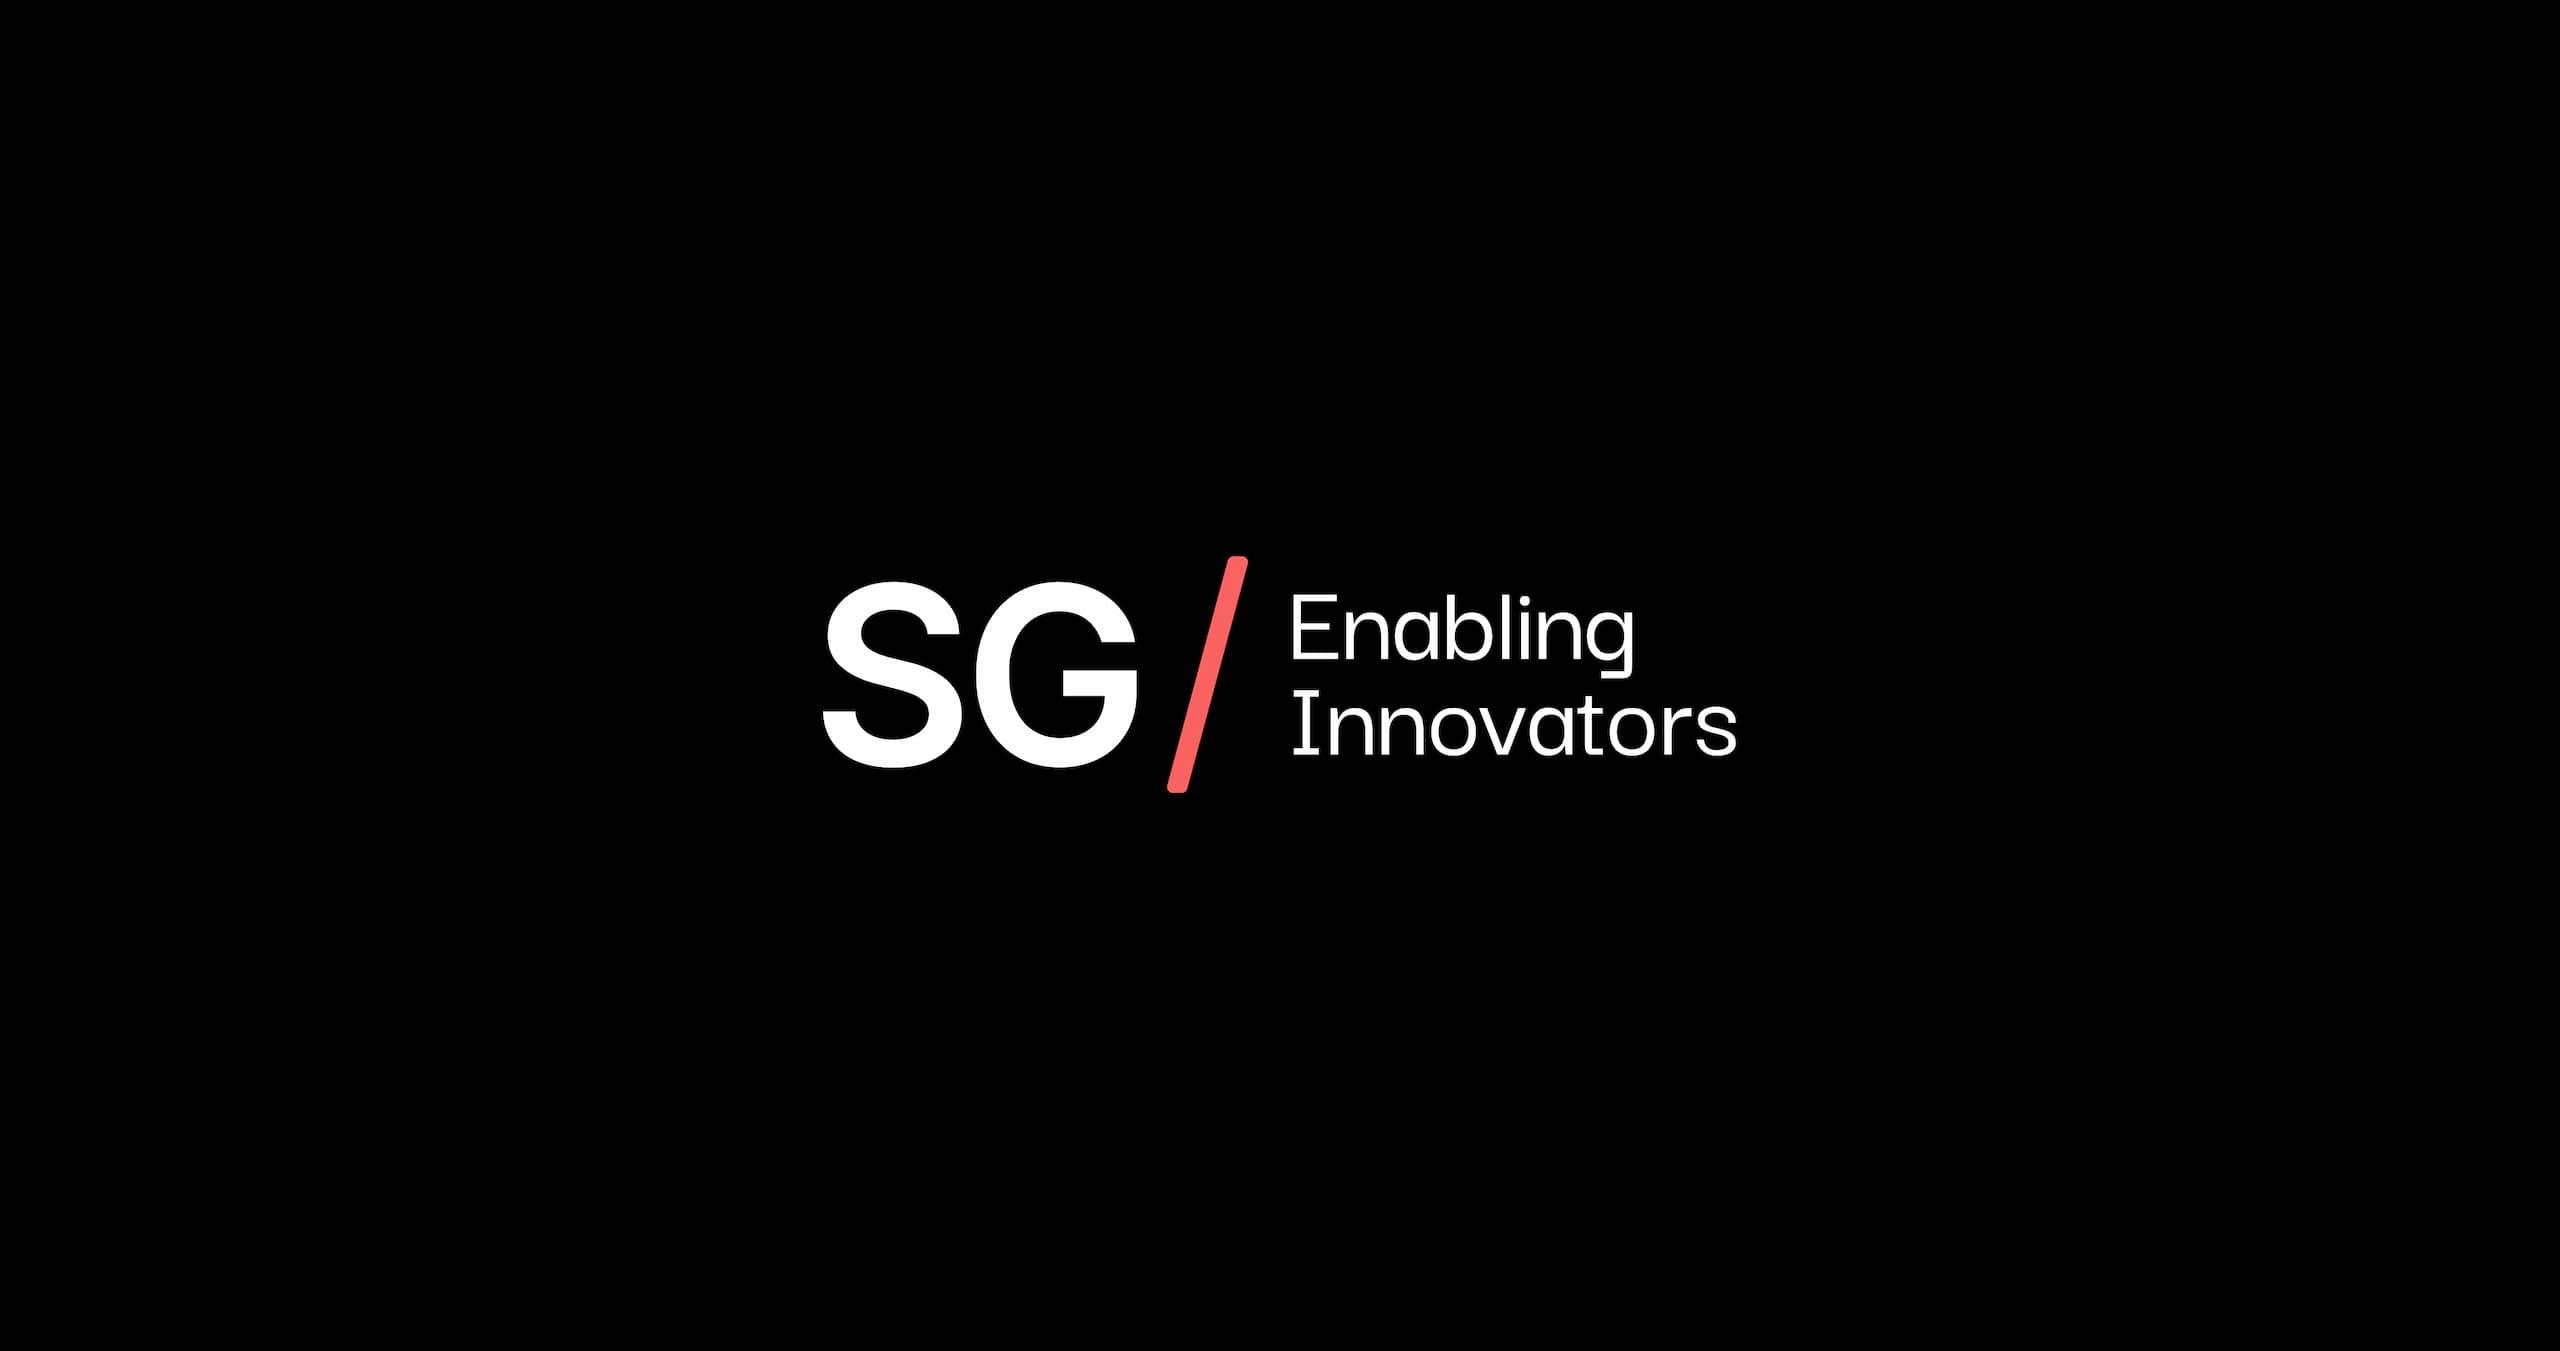 White Logo on black background with coral coloured forward slash between SG and Enabling Innovators. Logo designed by Orangery, a technology marketing agency.